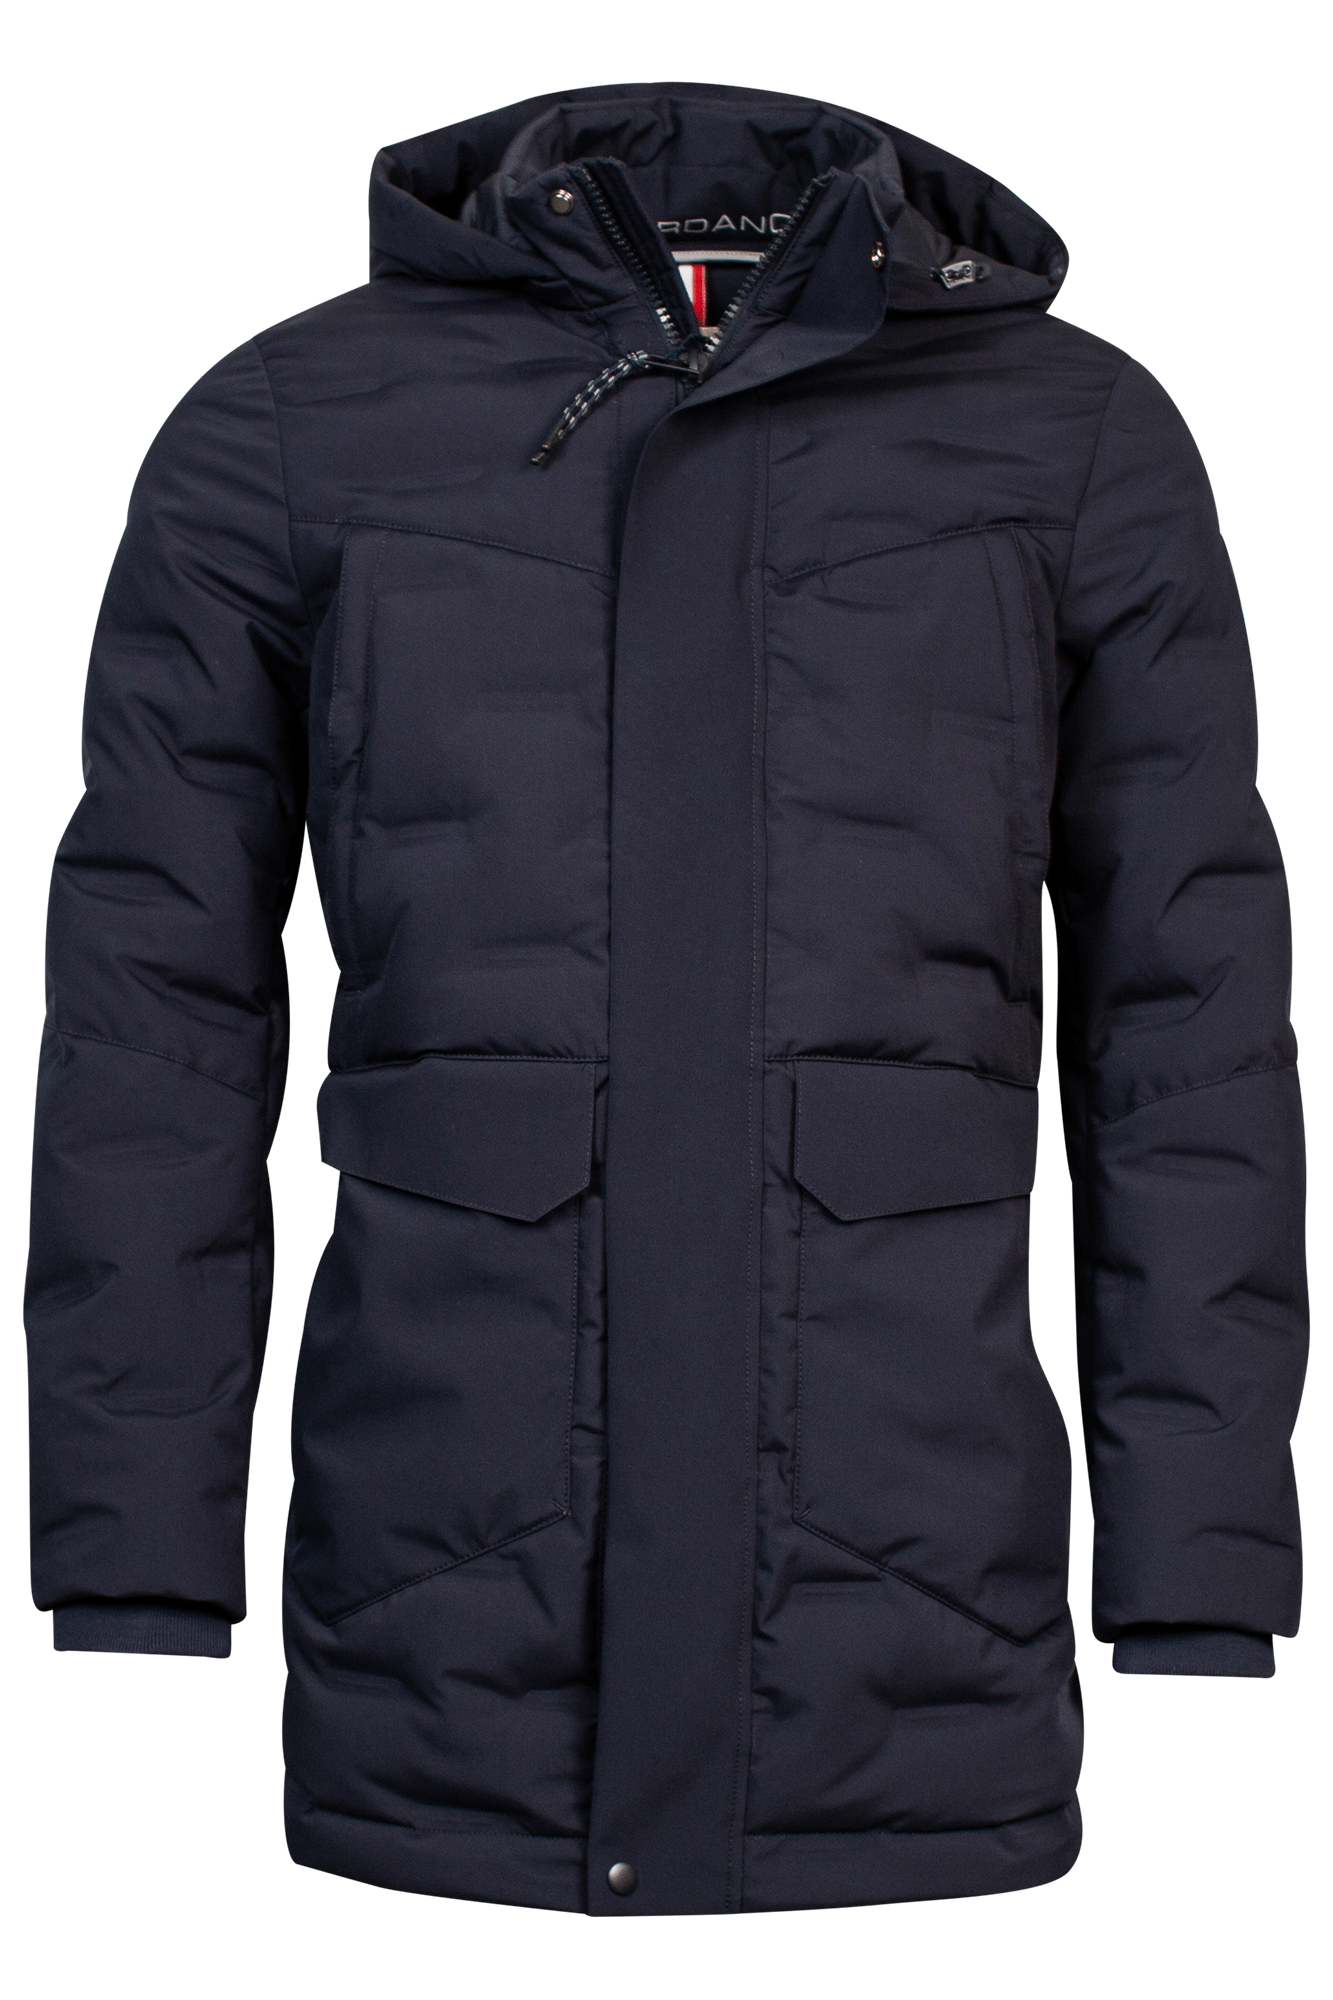 Water and windproof coat in navy by Giordano